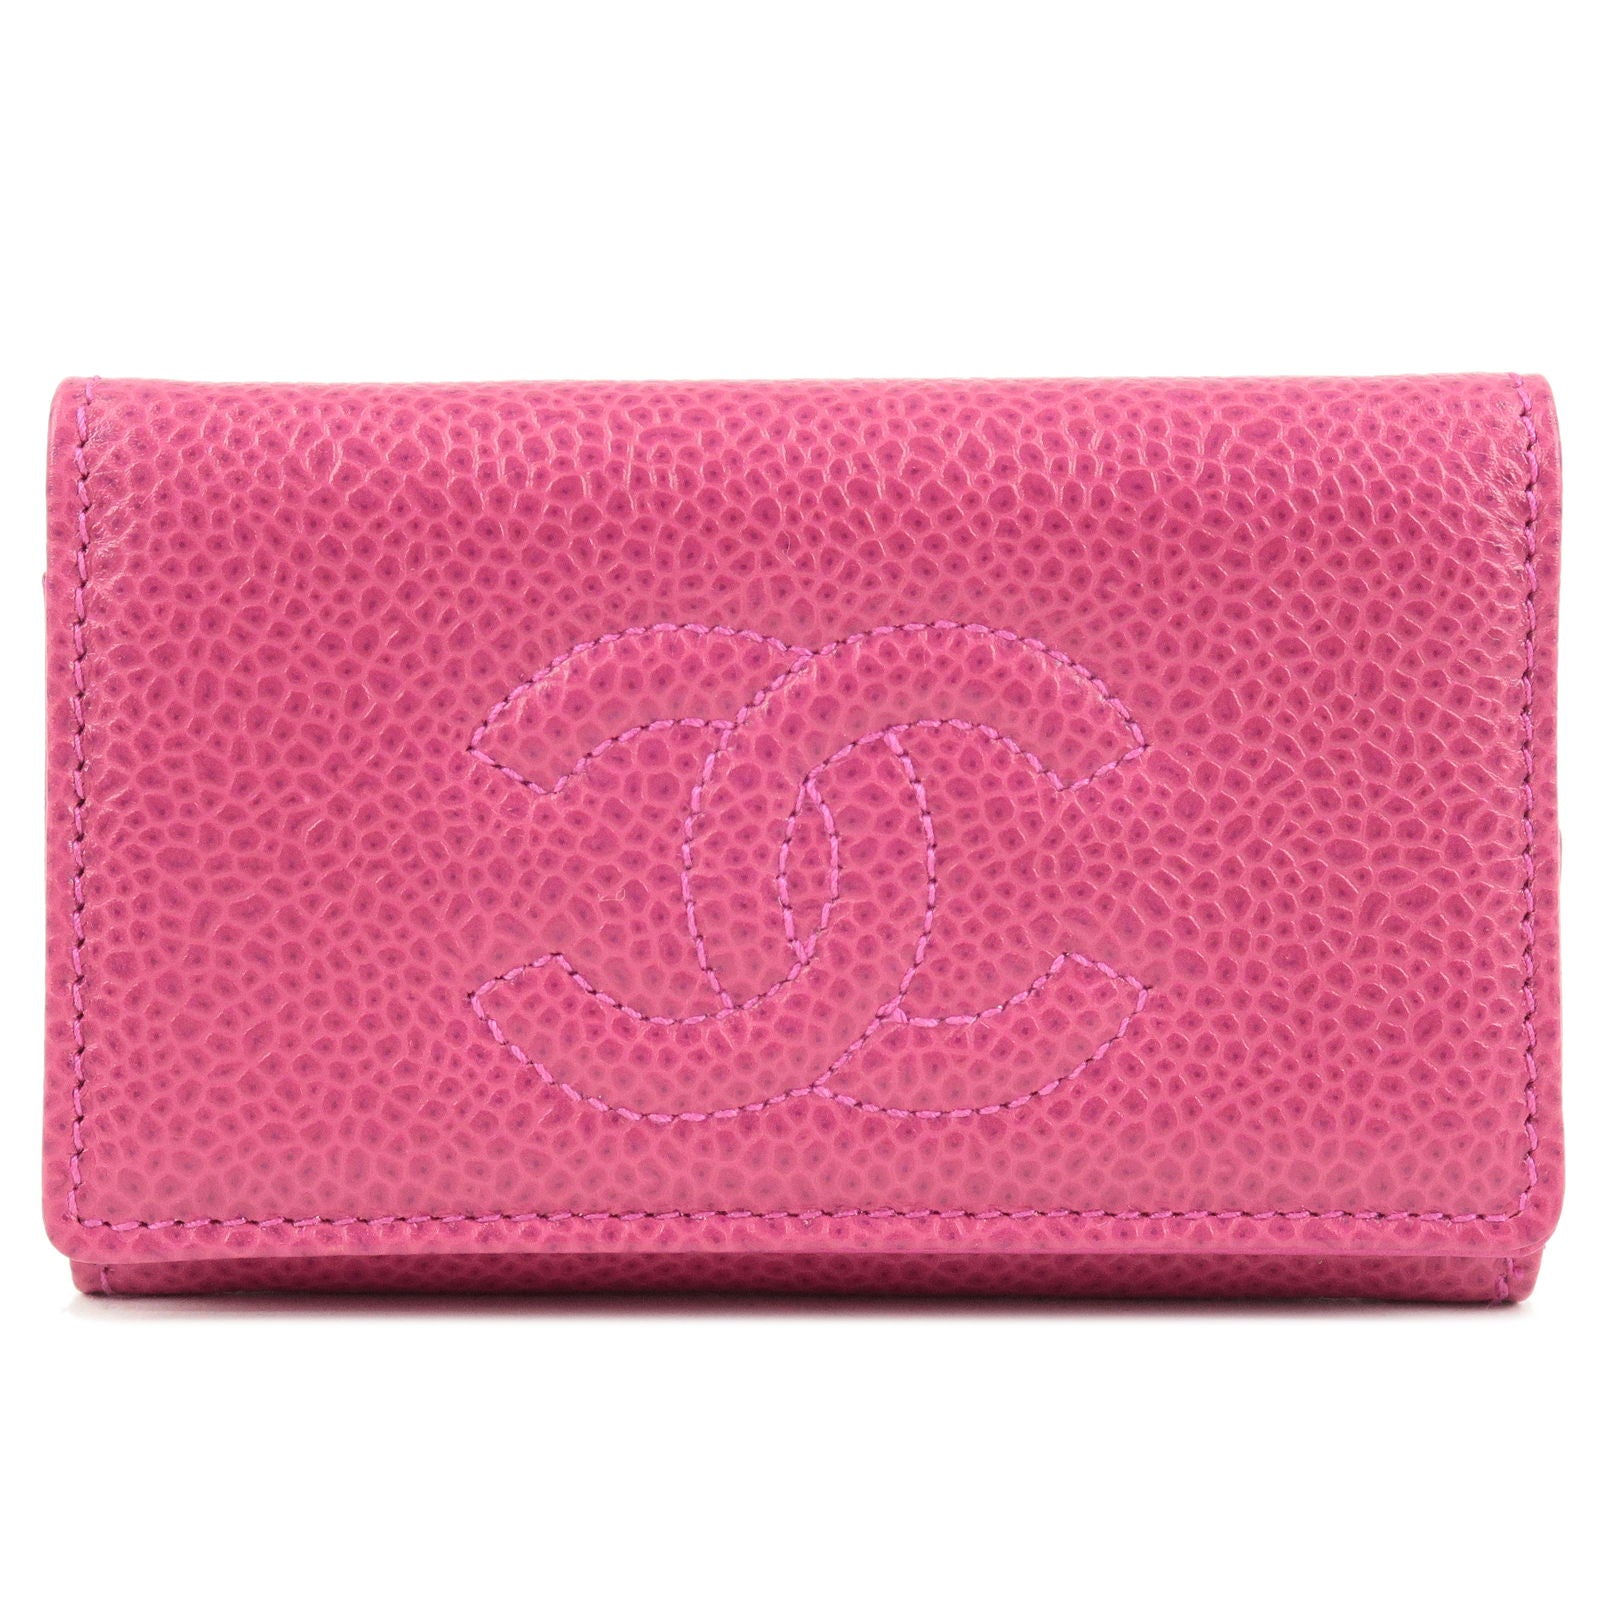 CHANEL-Caviar-Skin-6-Rings-Key-Case-Key-Holder-Pink-A01439 – dct-ep_vintage  luxury Store